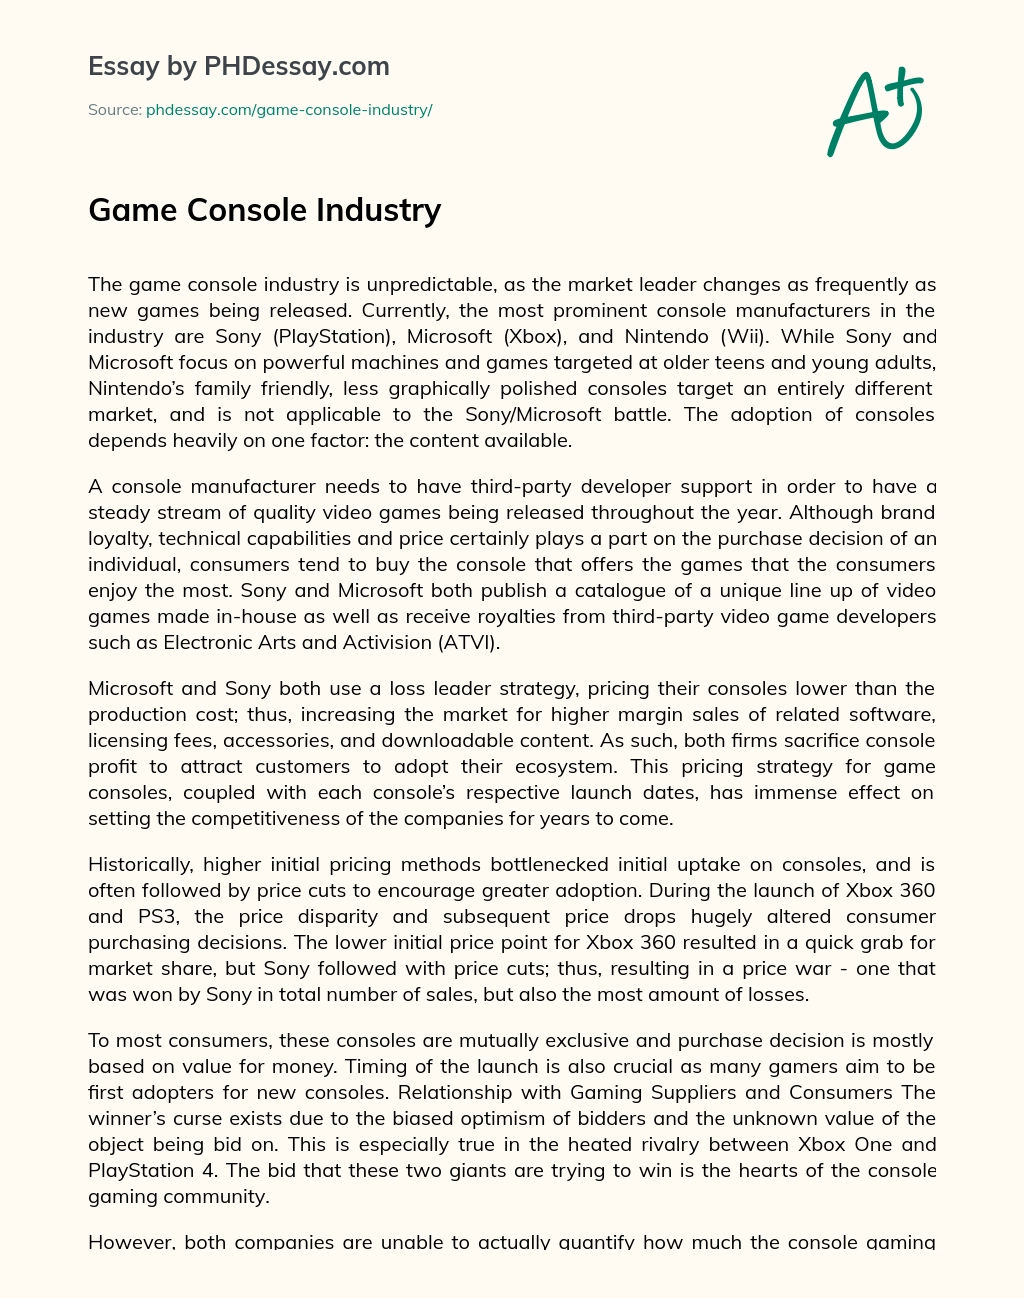 Game Console Industry essay